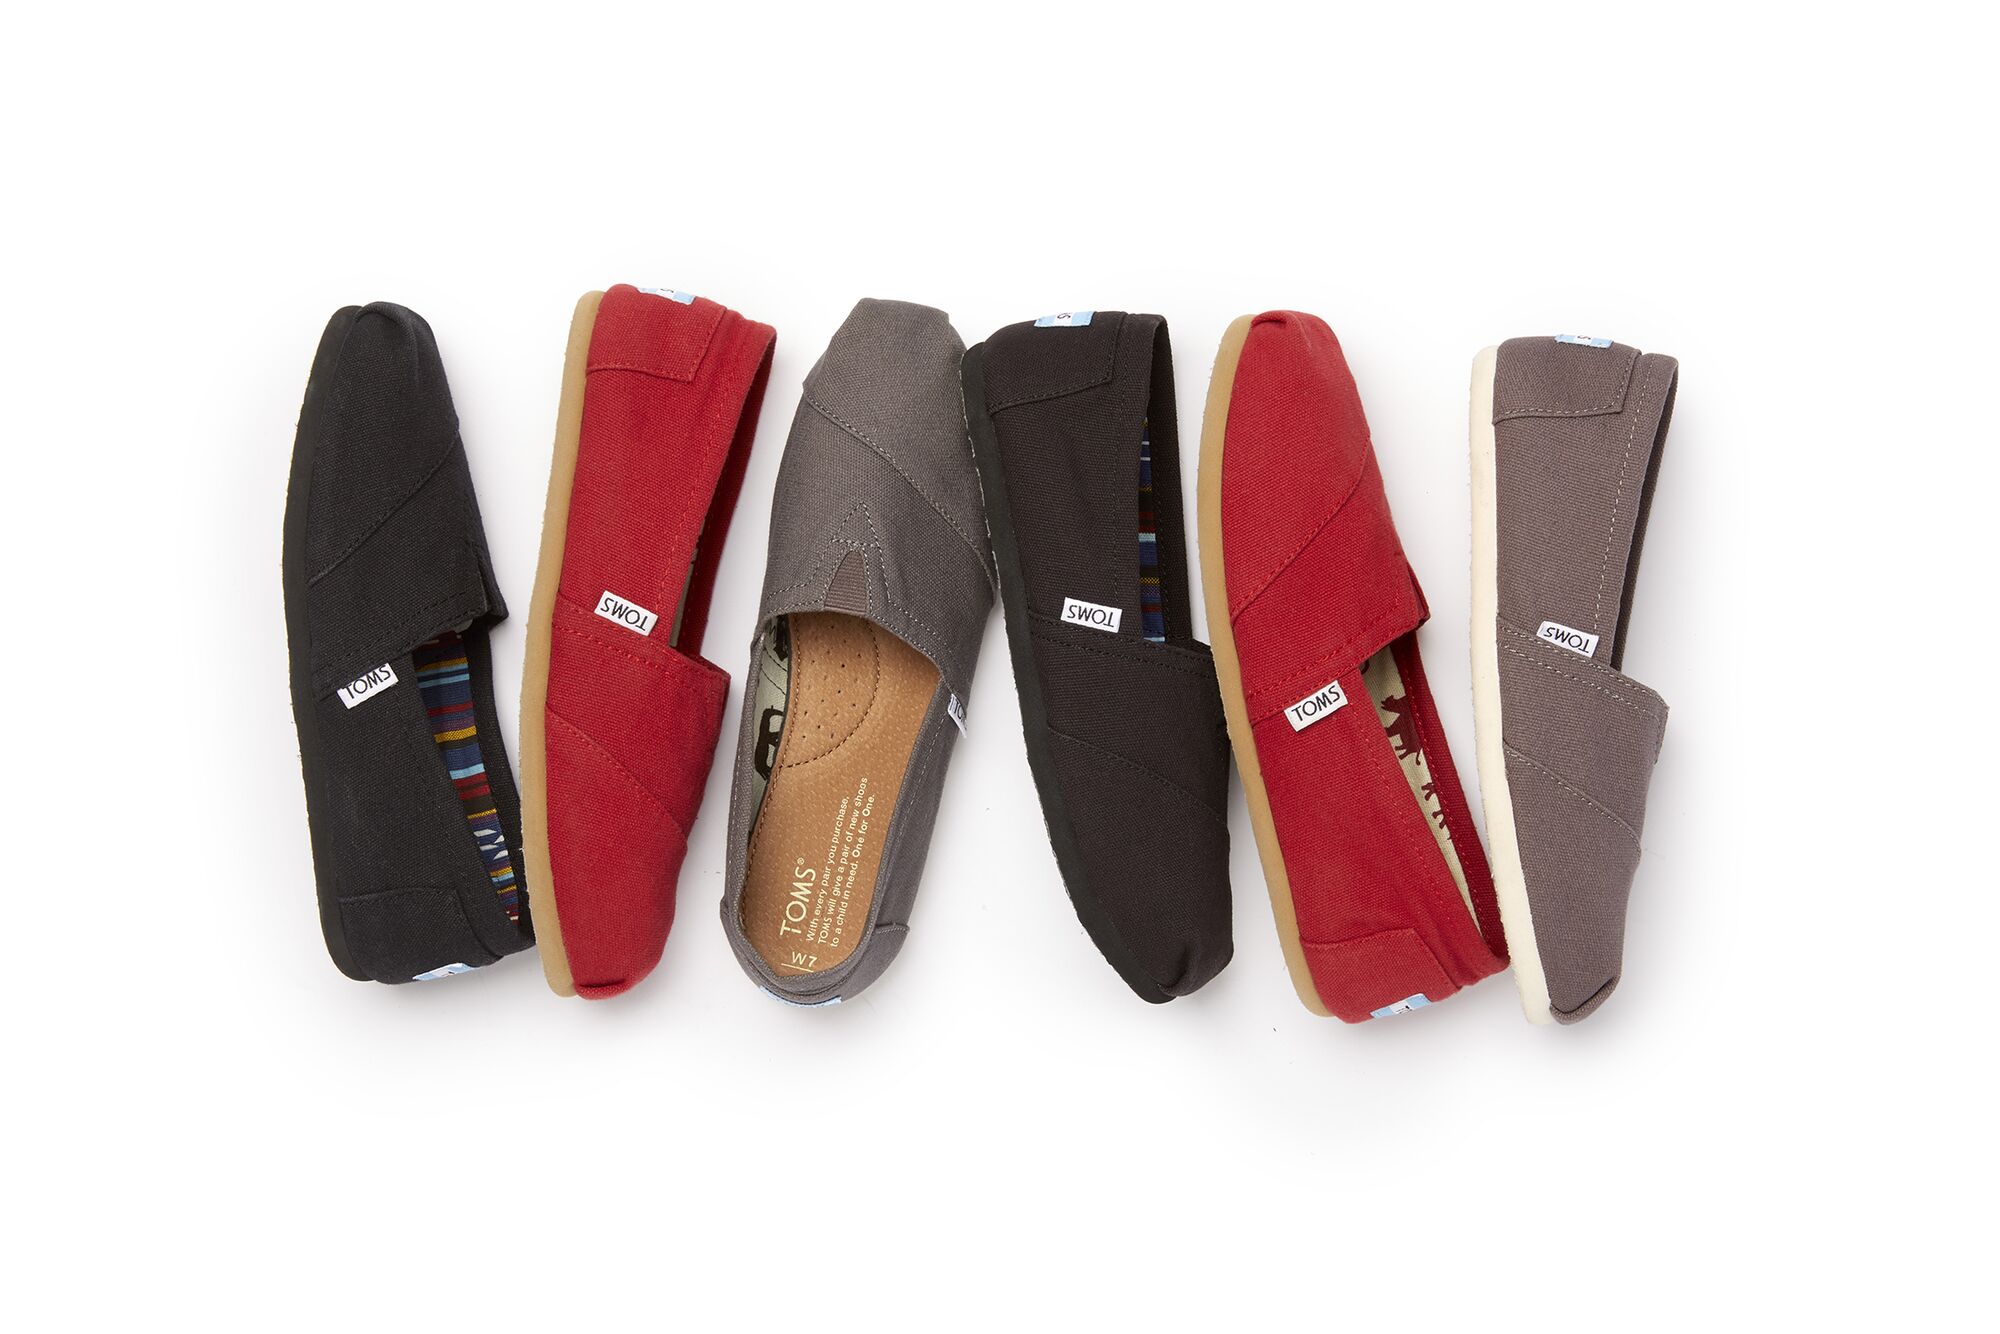 Toms Shoes Ends One-to-One Giving Model in Turnaround Plan - Bloomberg